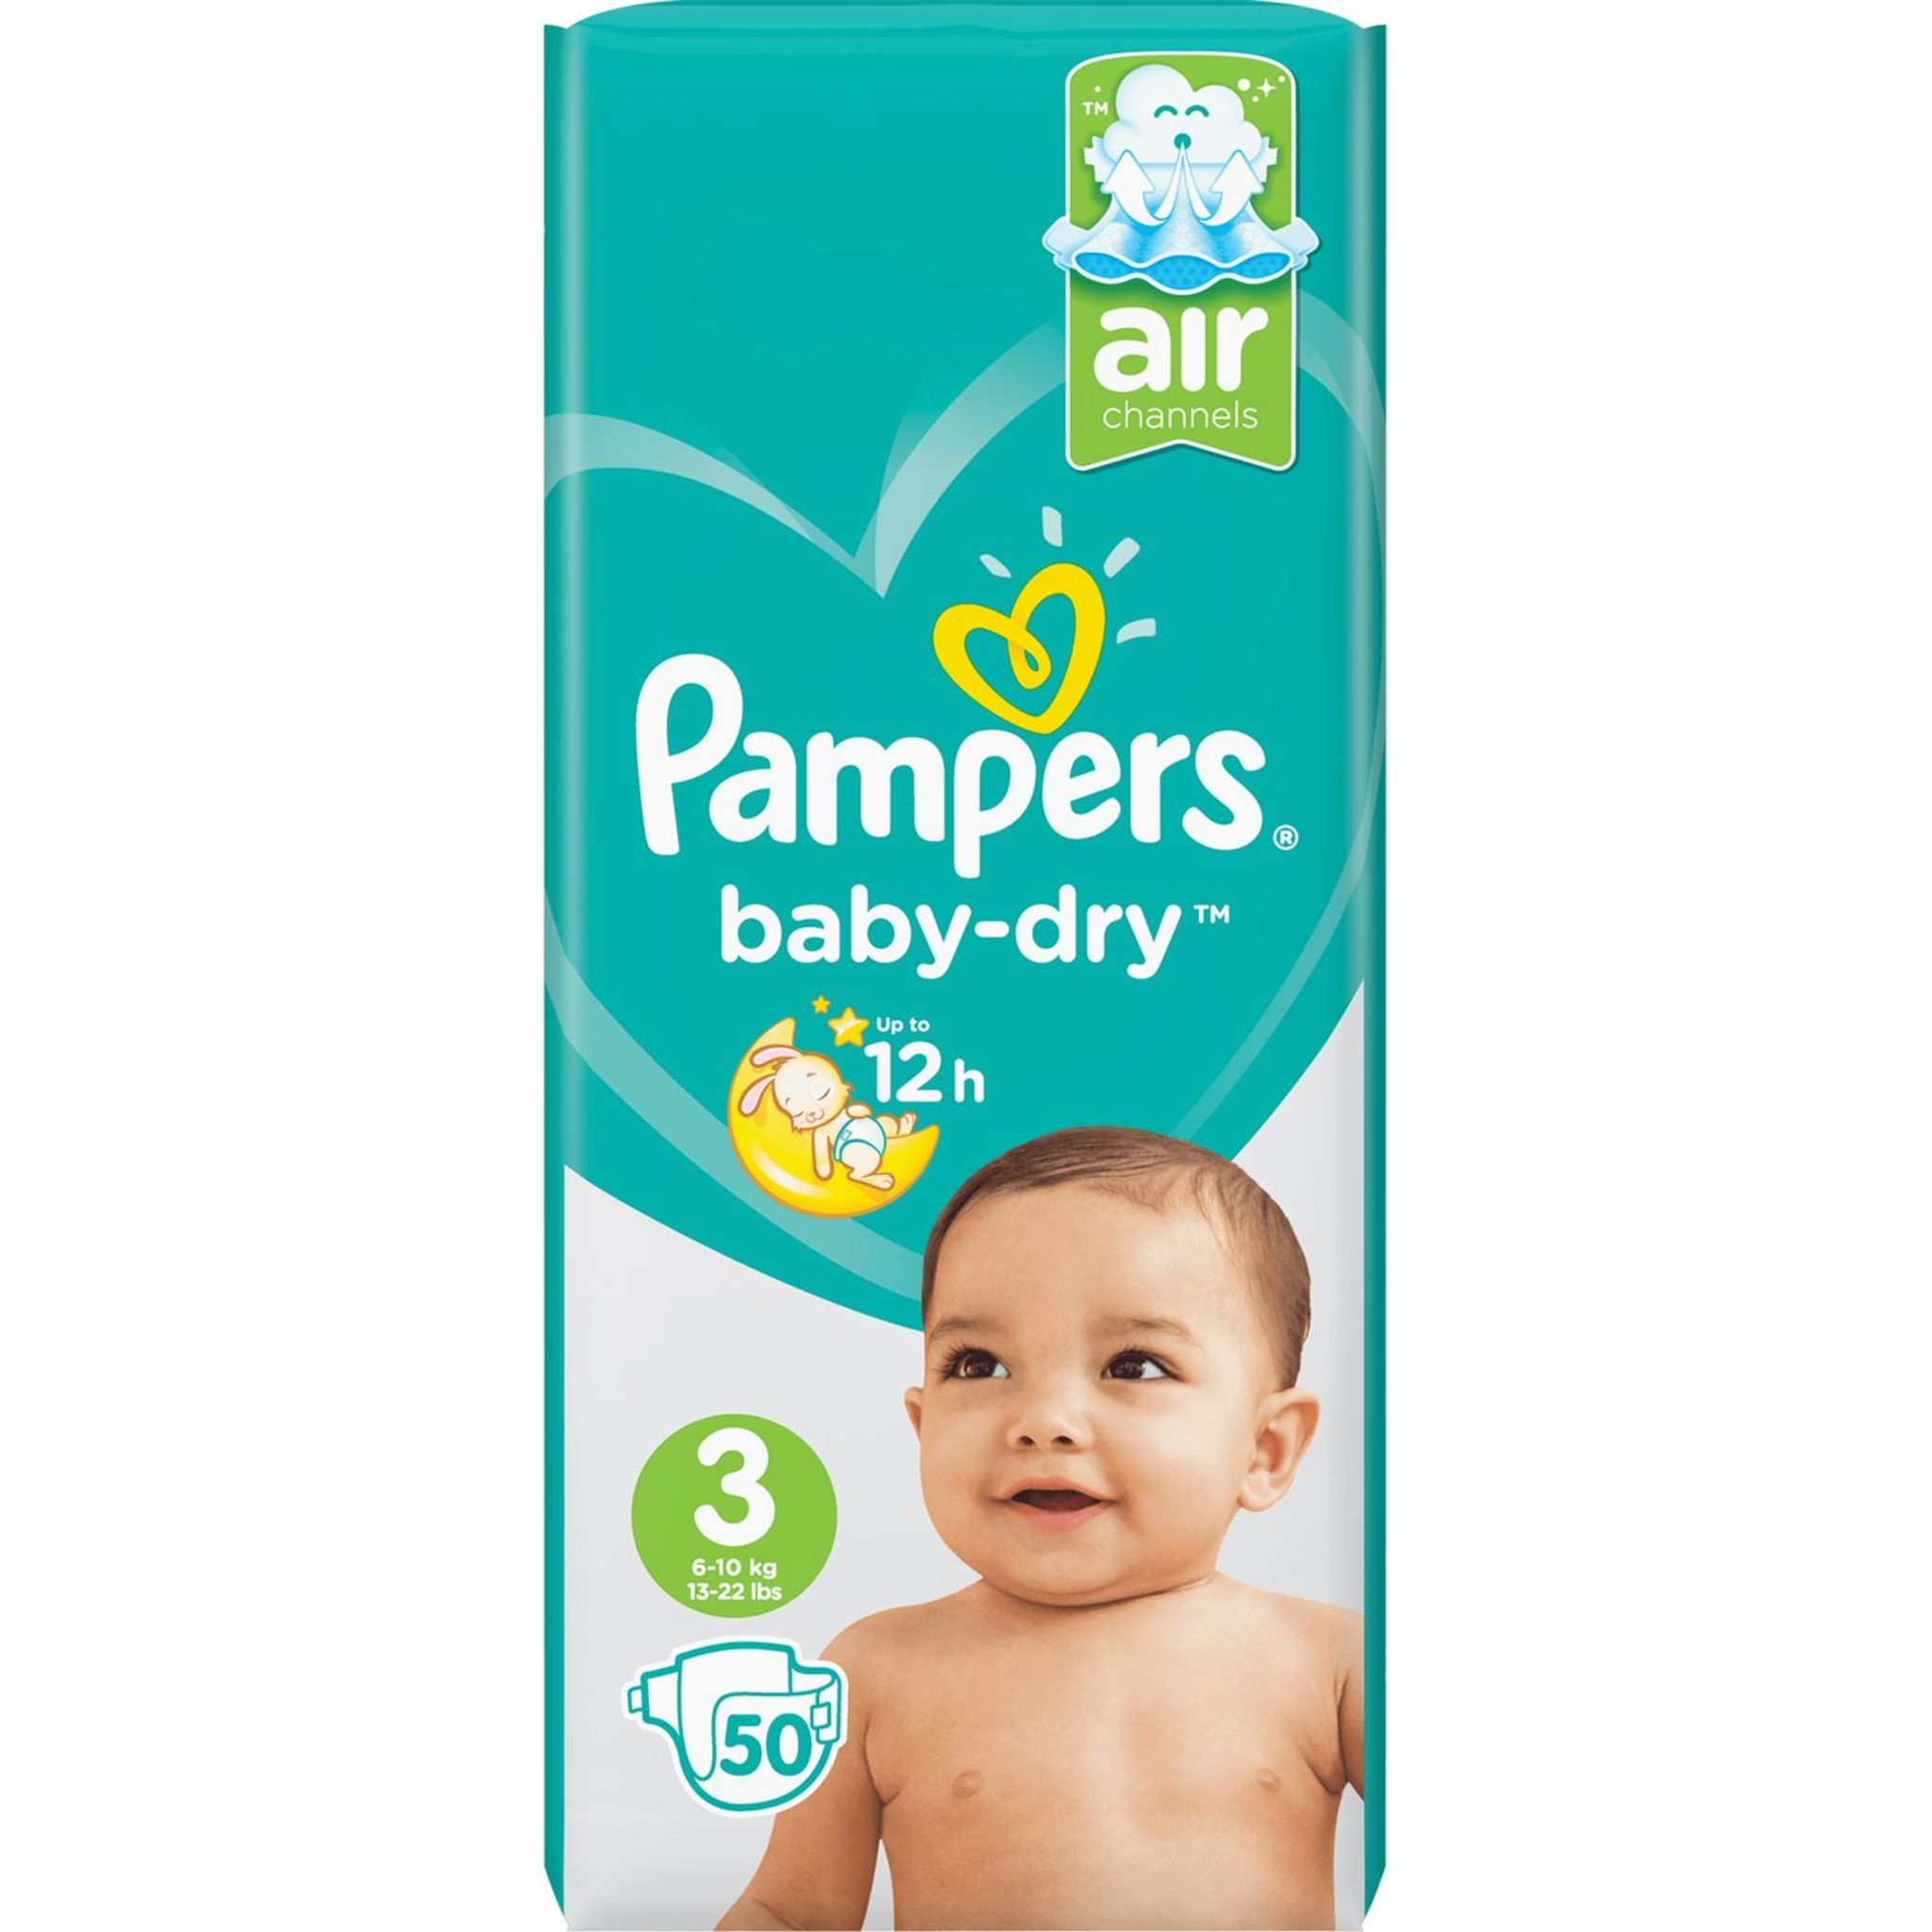 368 Couches Pampers Baby Dry GIGA Taille 6 Nouveau emballage Kgs 15 